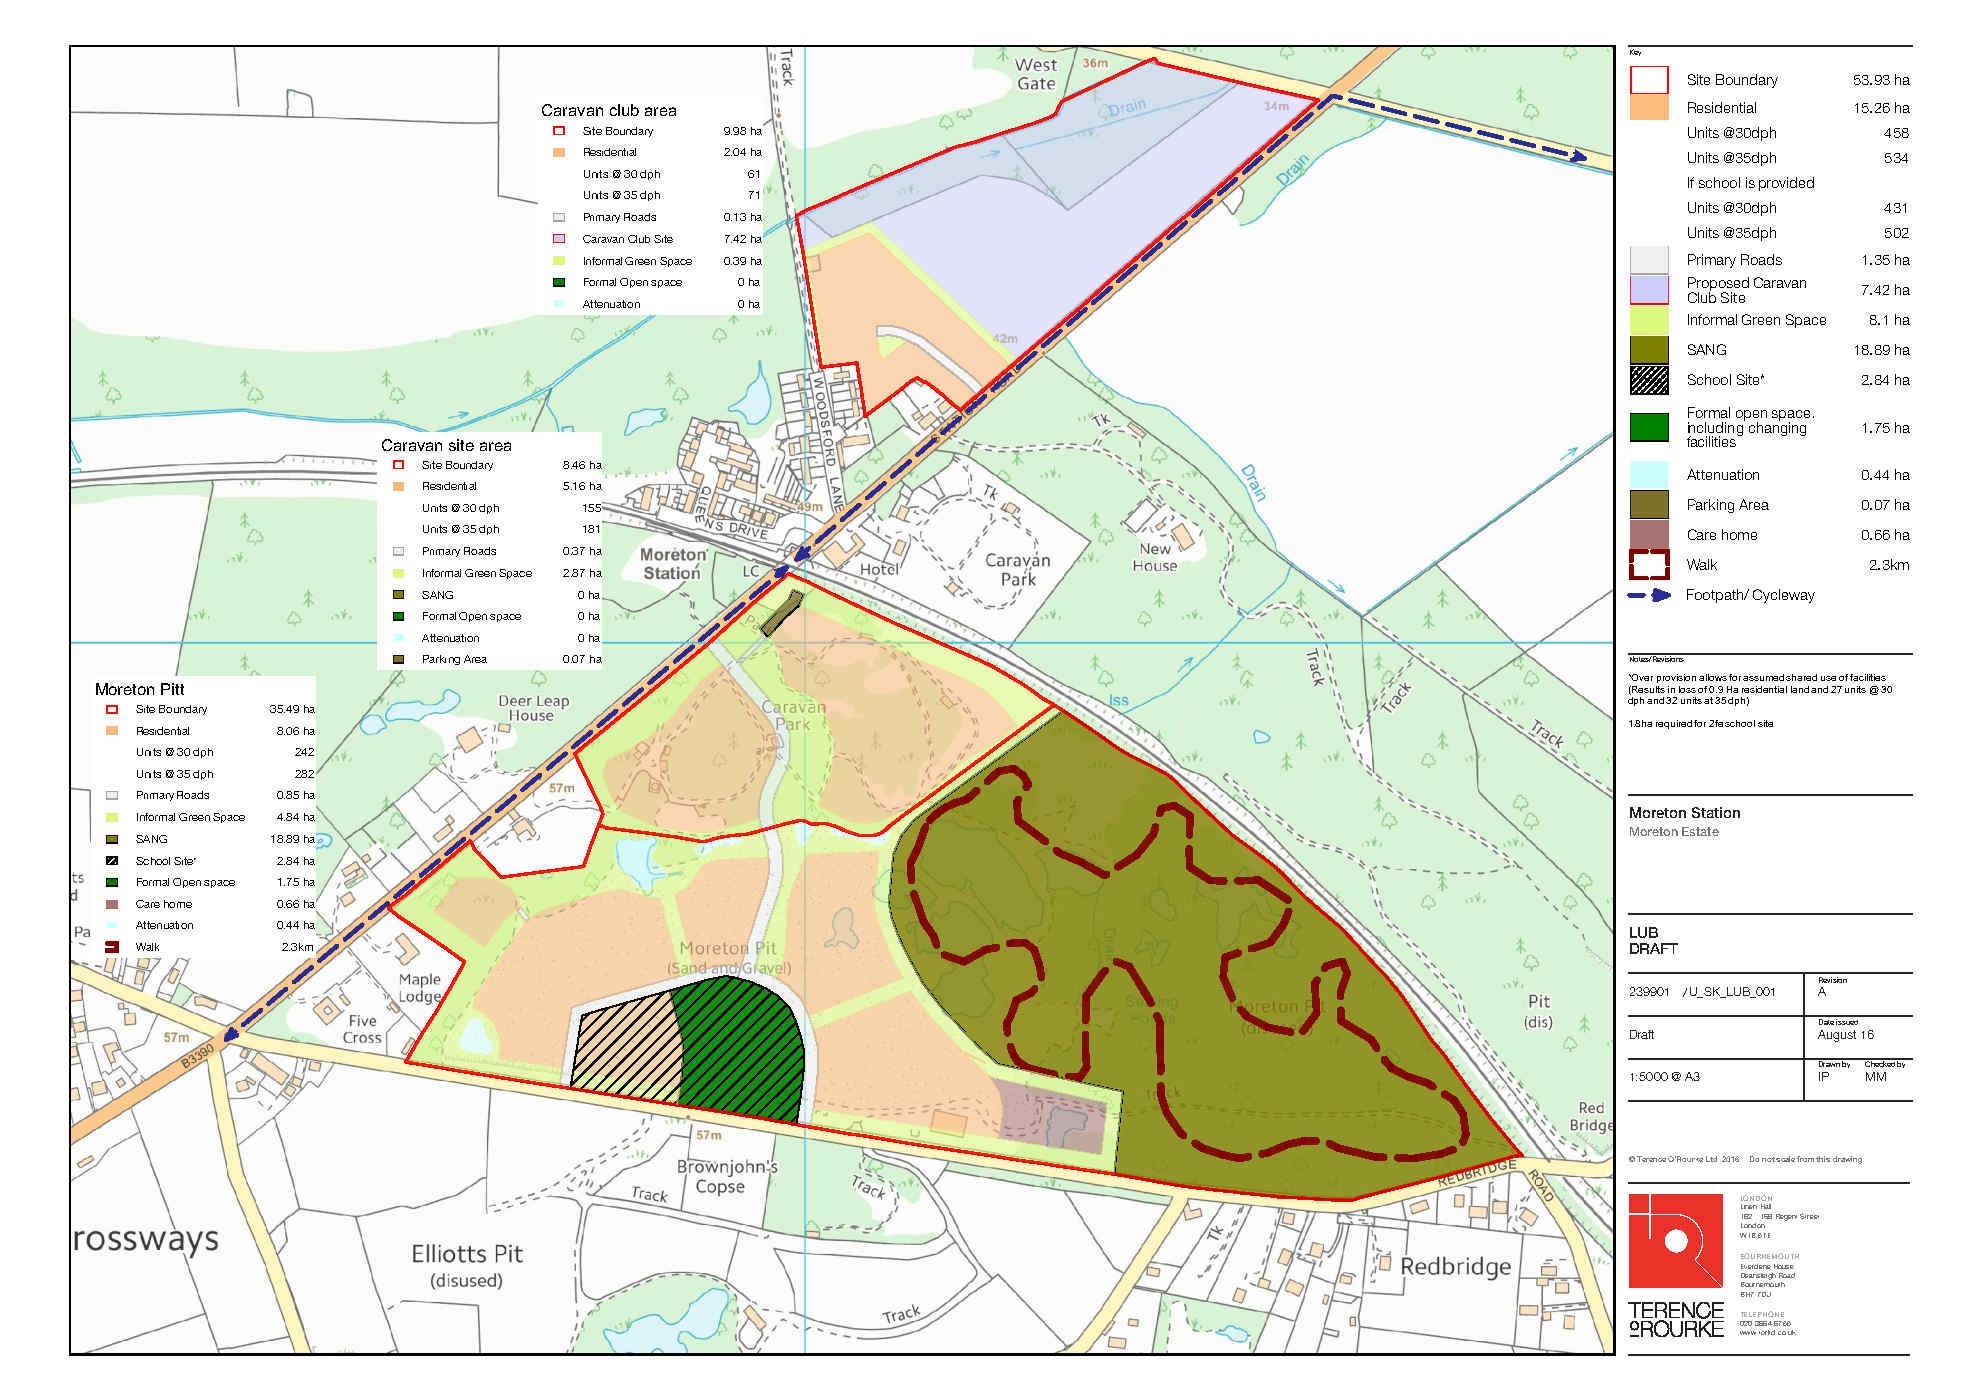 proposed allocation for homes and convenience retail space